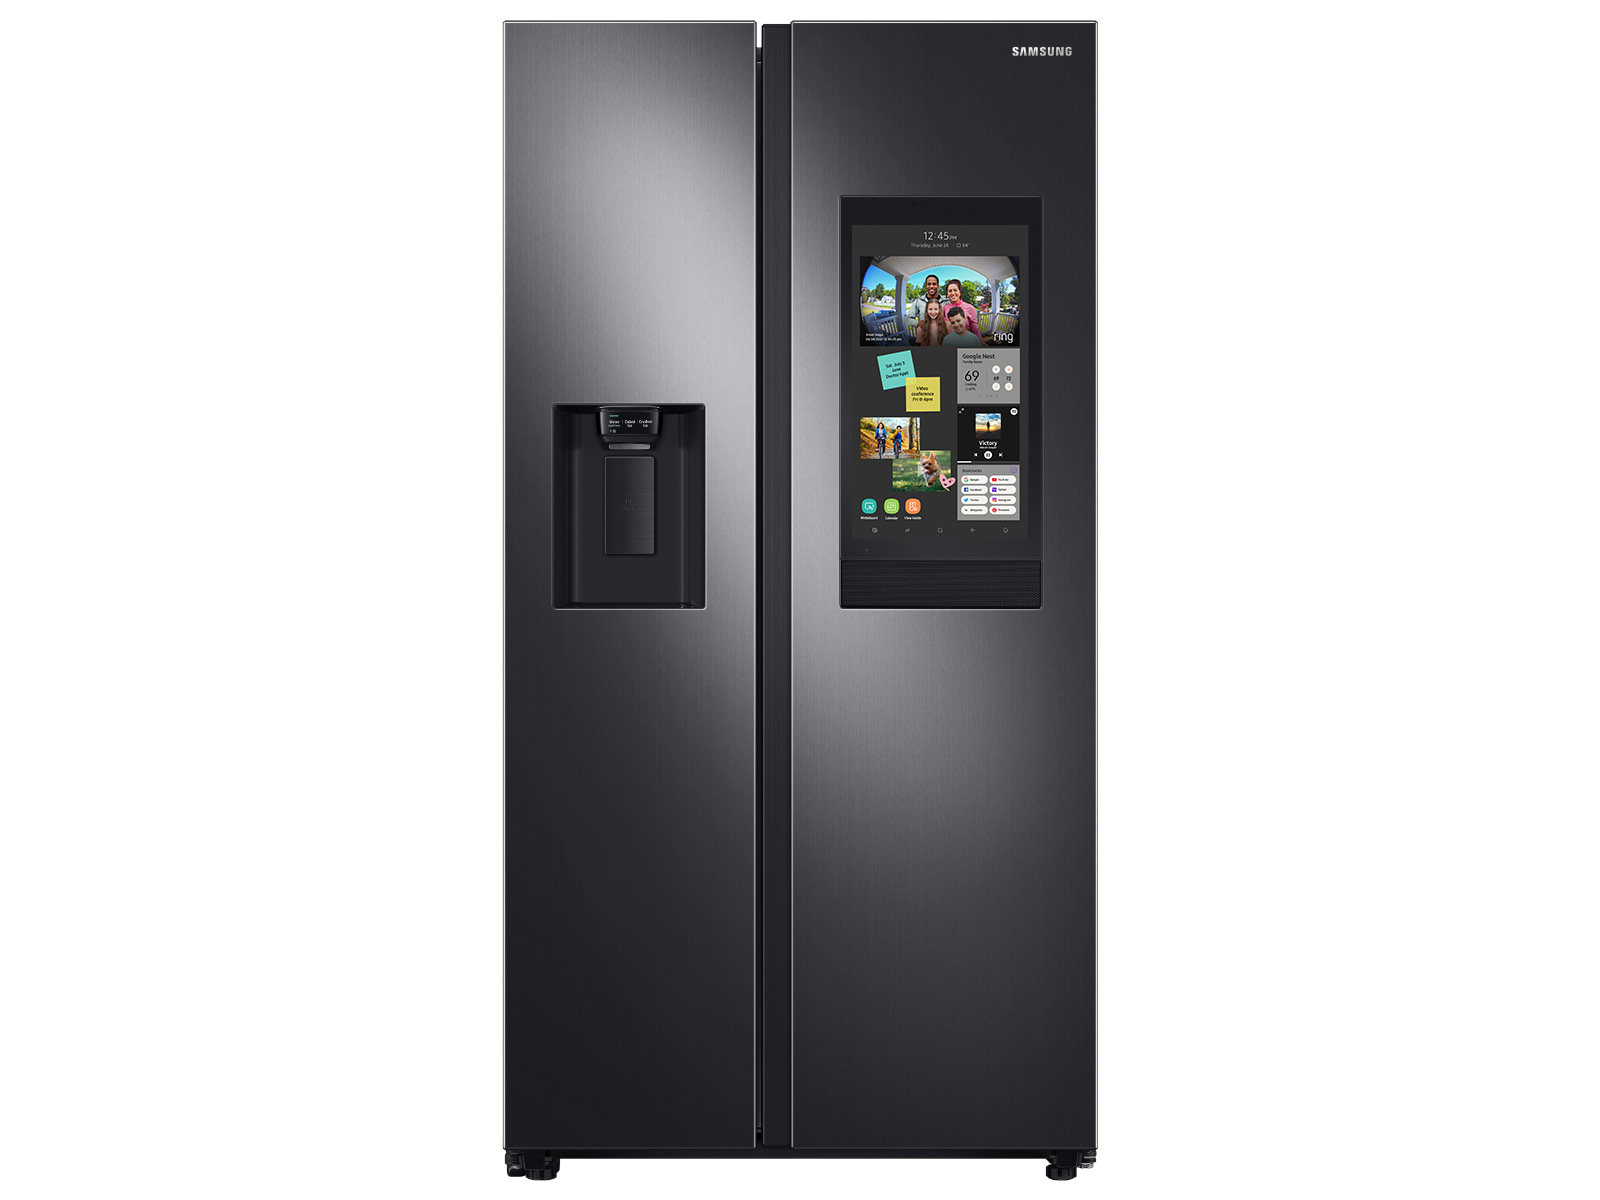 Photos - Fridge Samsung 22 cu. ft. Counter Depth Side-by-Side Refrigerator with Touch Scre 